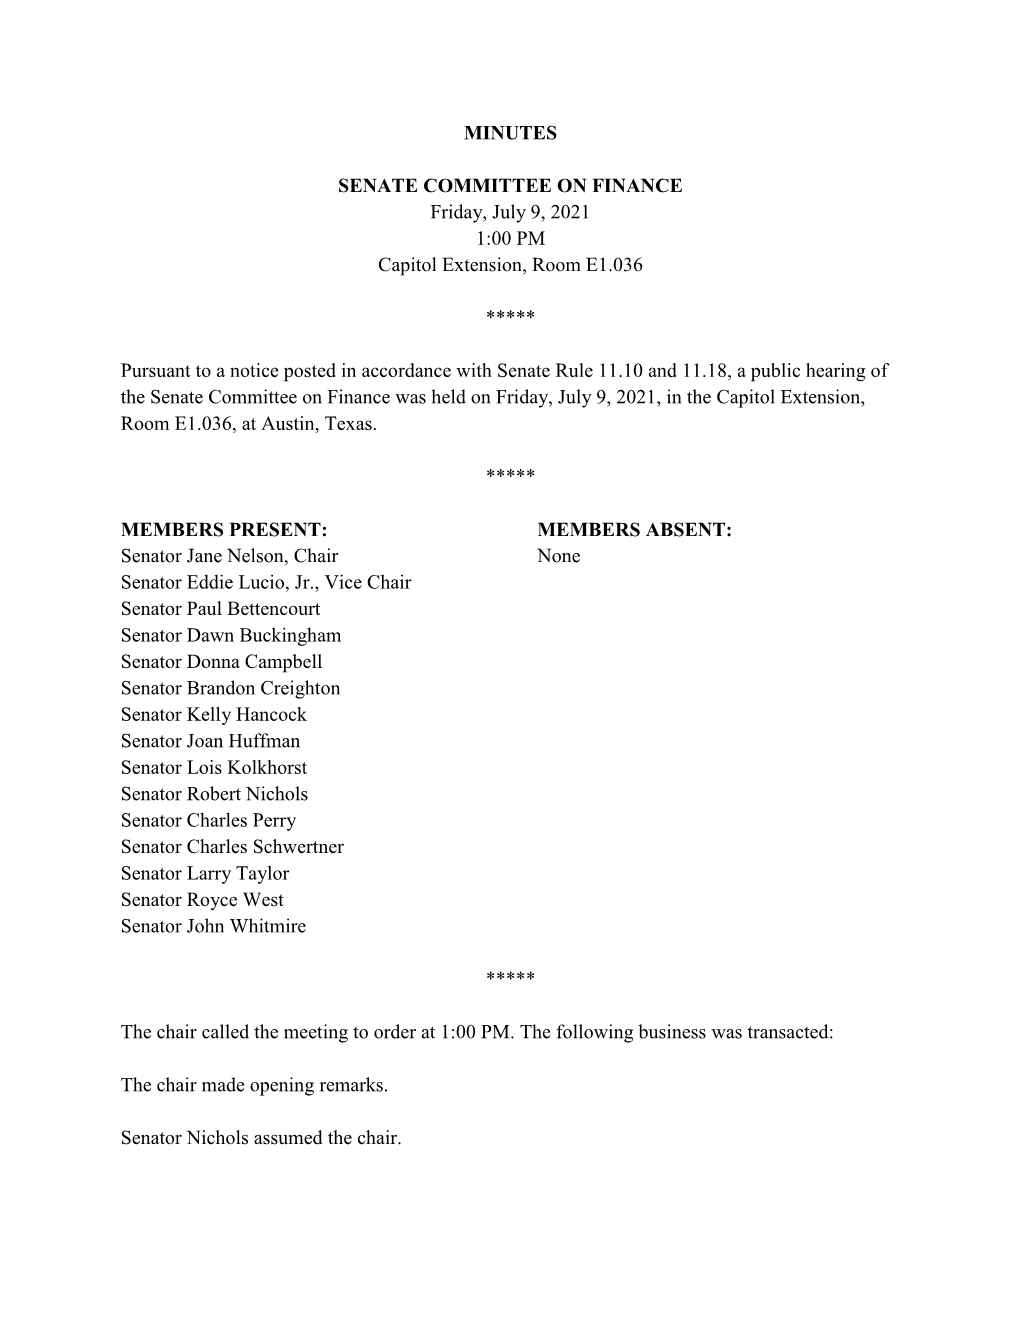 MINUTES SENATE COMMITTEE on FINANCE Friday, July 9, 2021 1:00